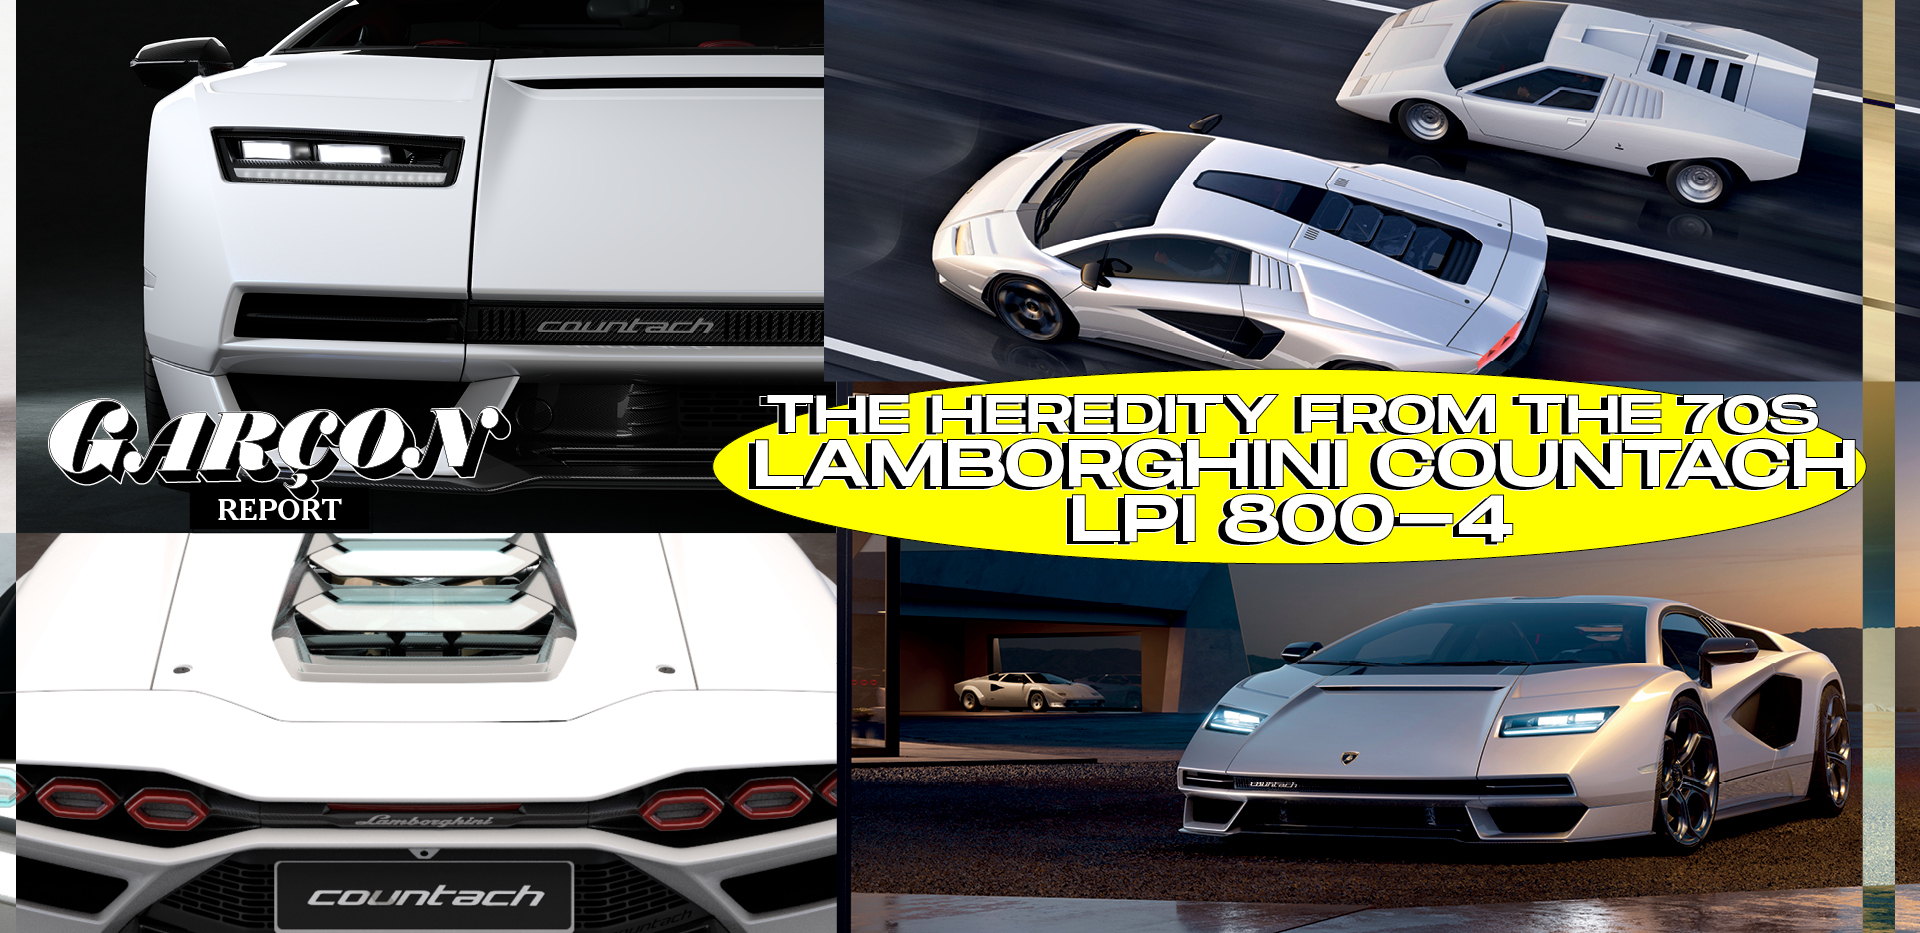 The Heredity from the 70s – Lamborghini Countach LPI 800-4